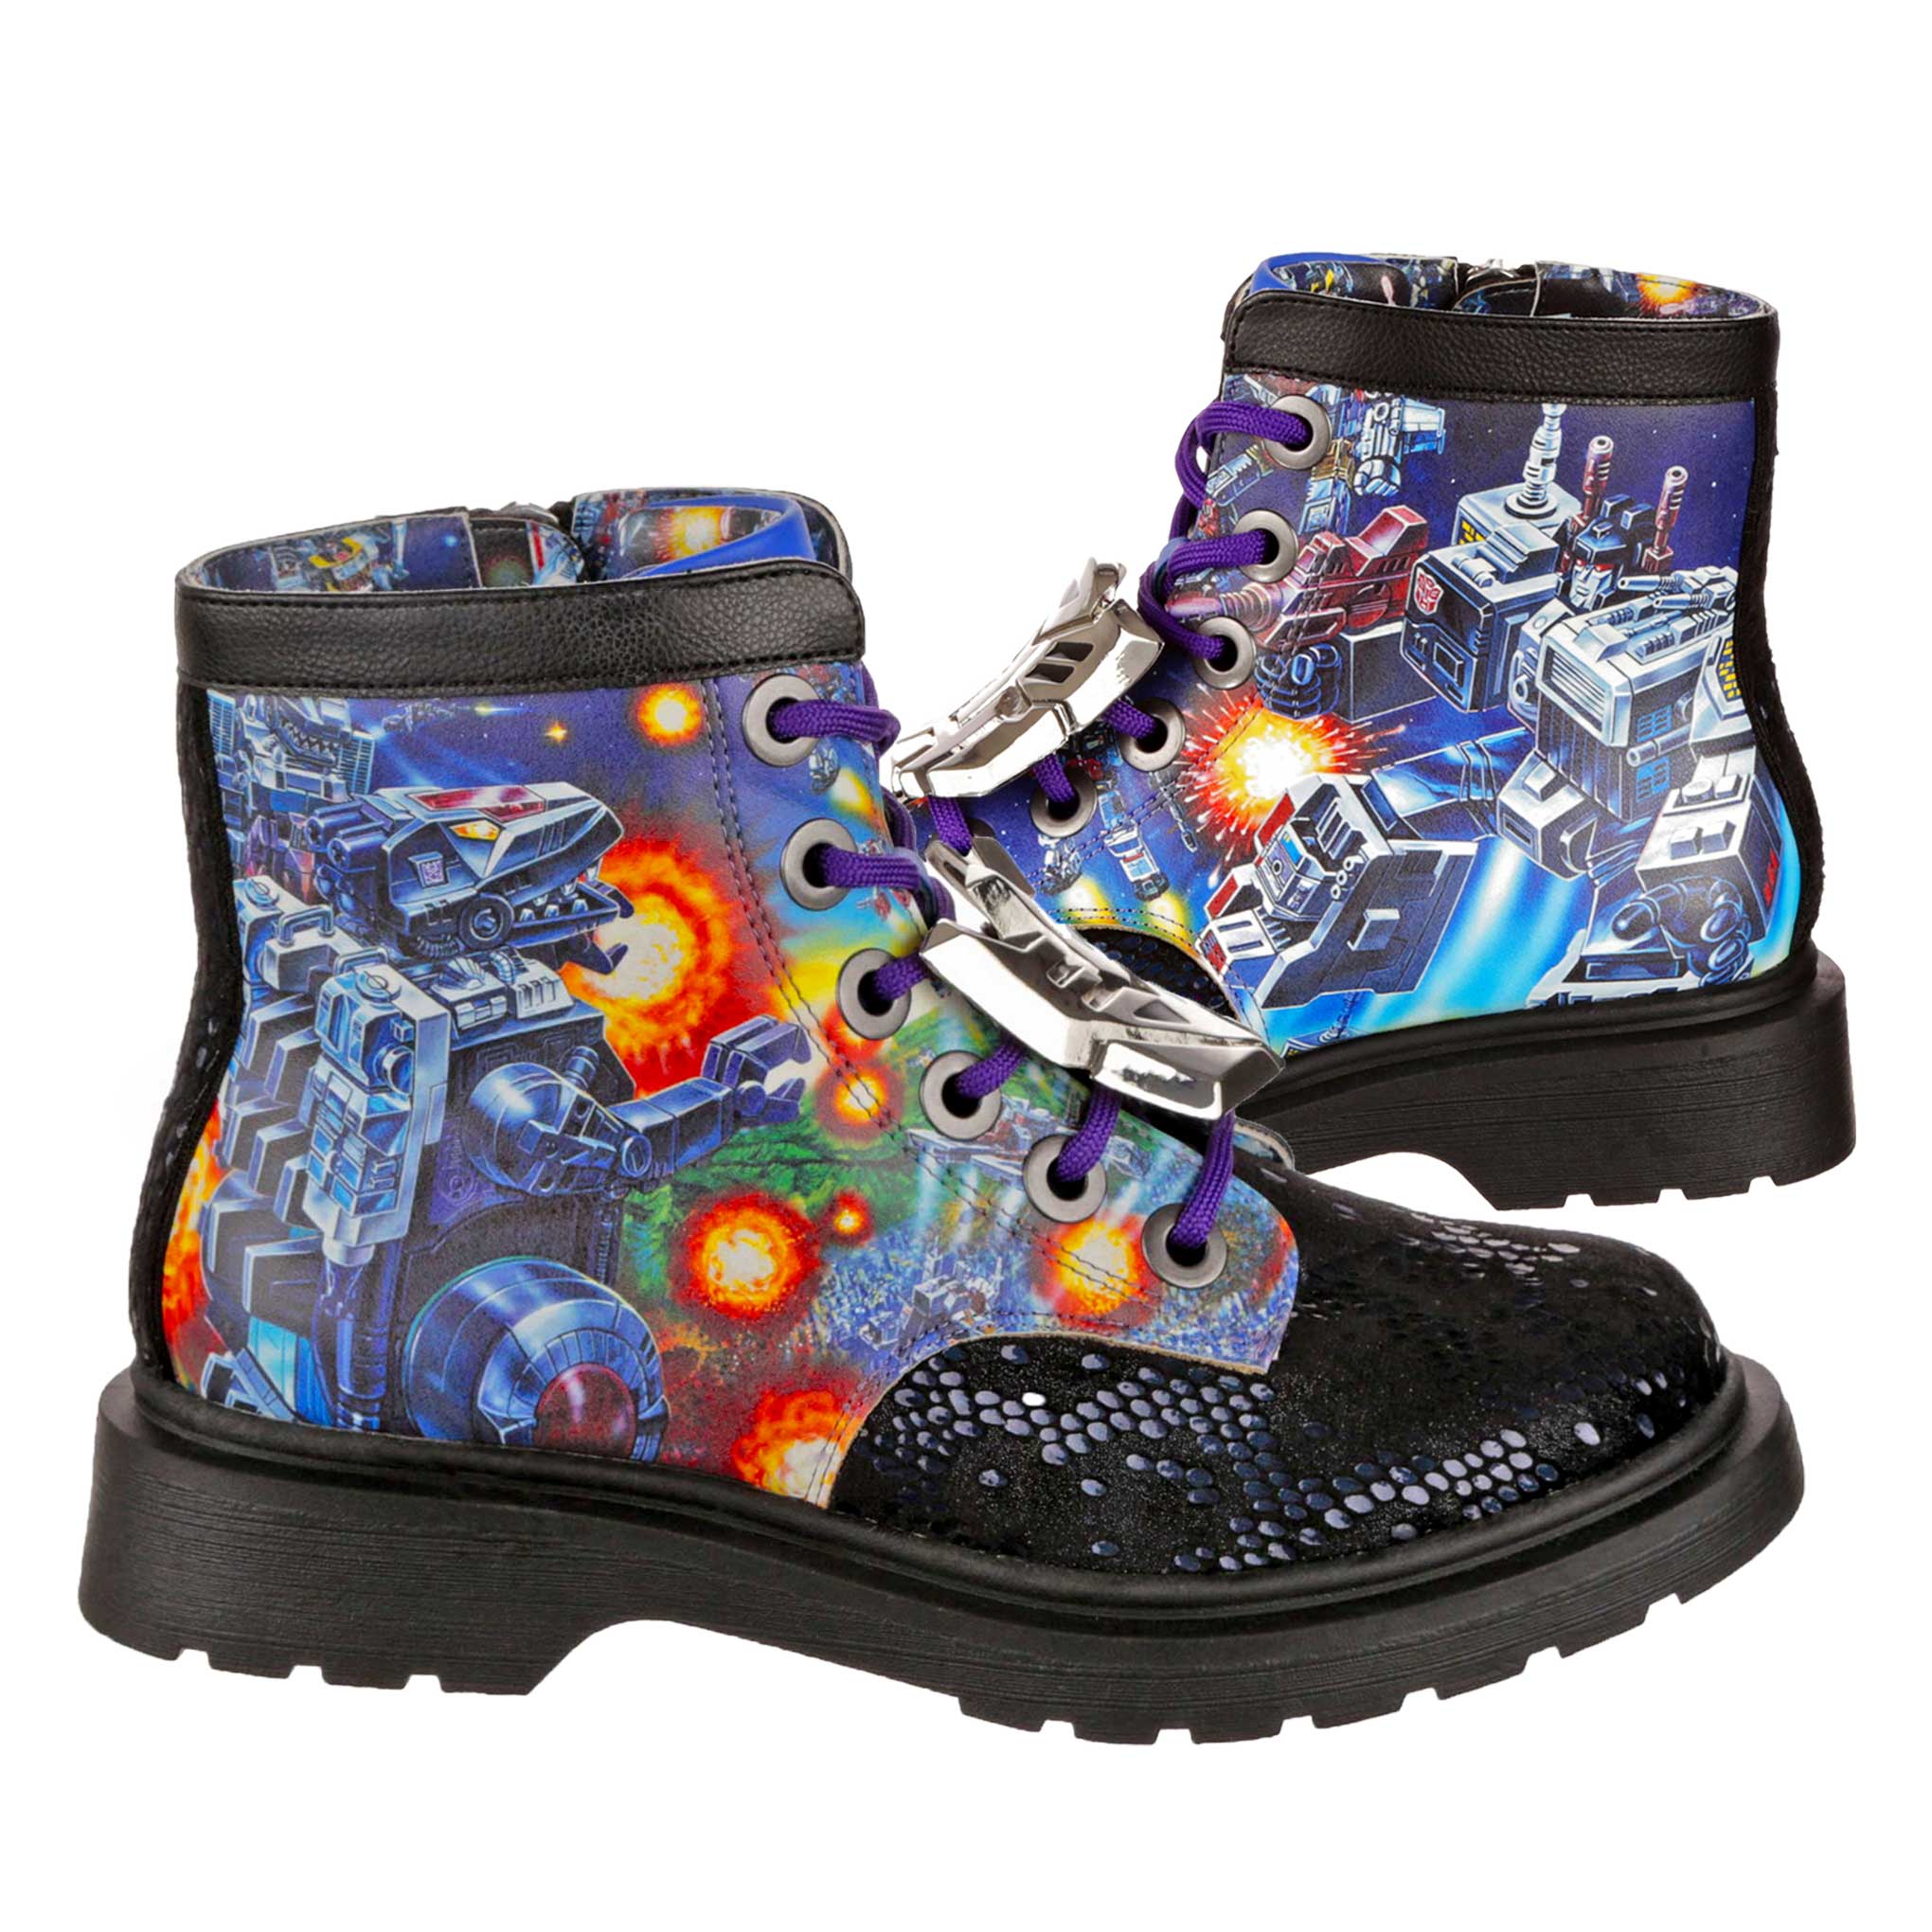 A pair of lace-up ankle boots with a vintage Transformers scene showing Trypticon battling Metroplex on either side of the boot. A black and metallic blue snakeskin print on the toe contrasts with the blue, orange and green Transformers print on the main body of the shoe. Black chunky soles match the black leather look piping on the boot. Purple laces thread through silver eyelets with silver metallic lace charms sitting on the laces. 